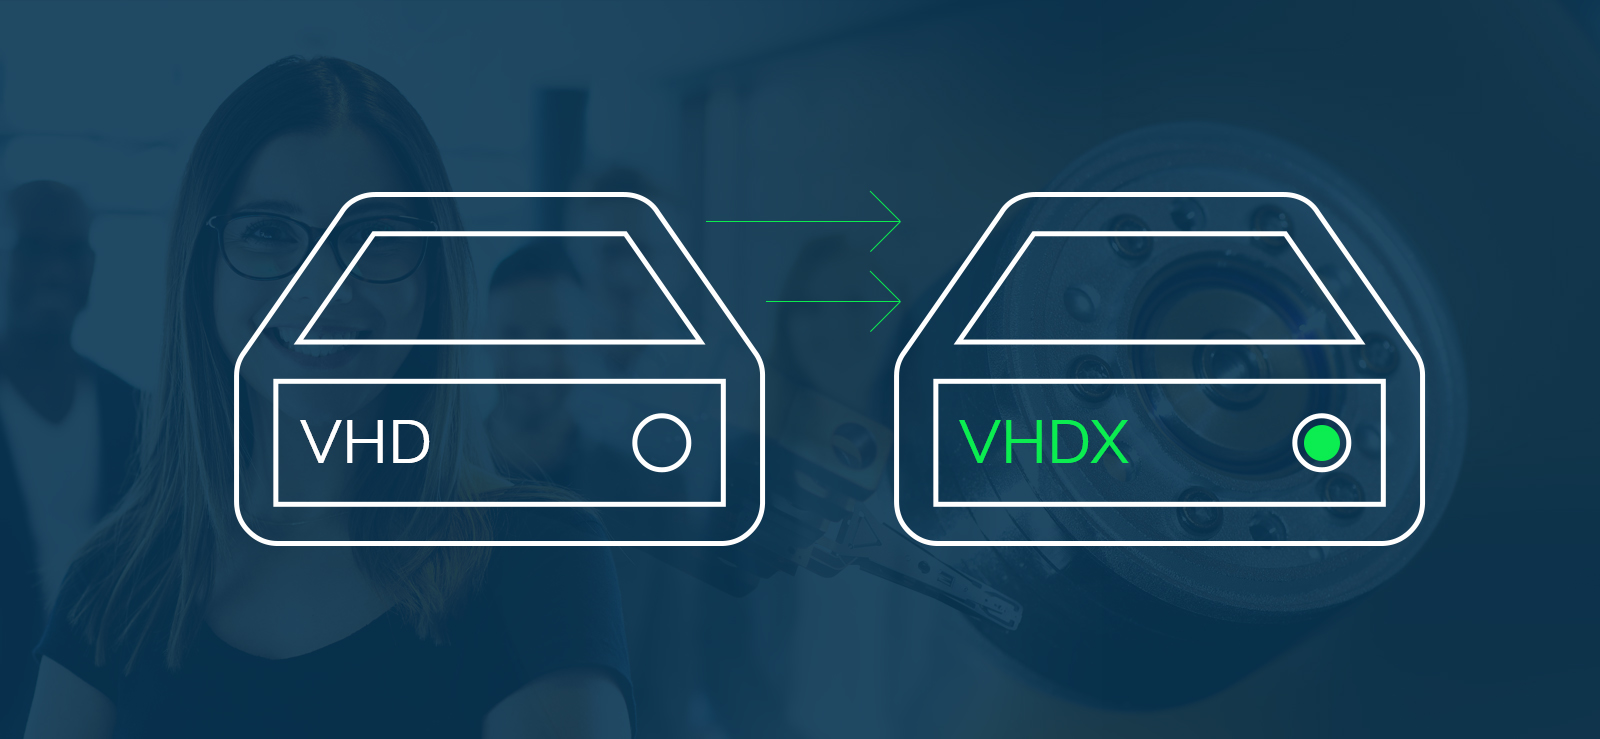 How to Convert VHD to VHDX File?